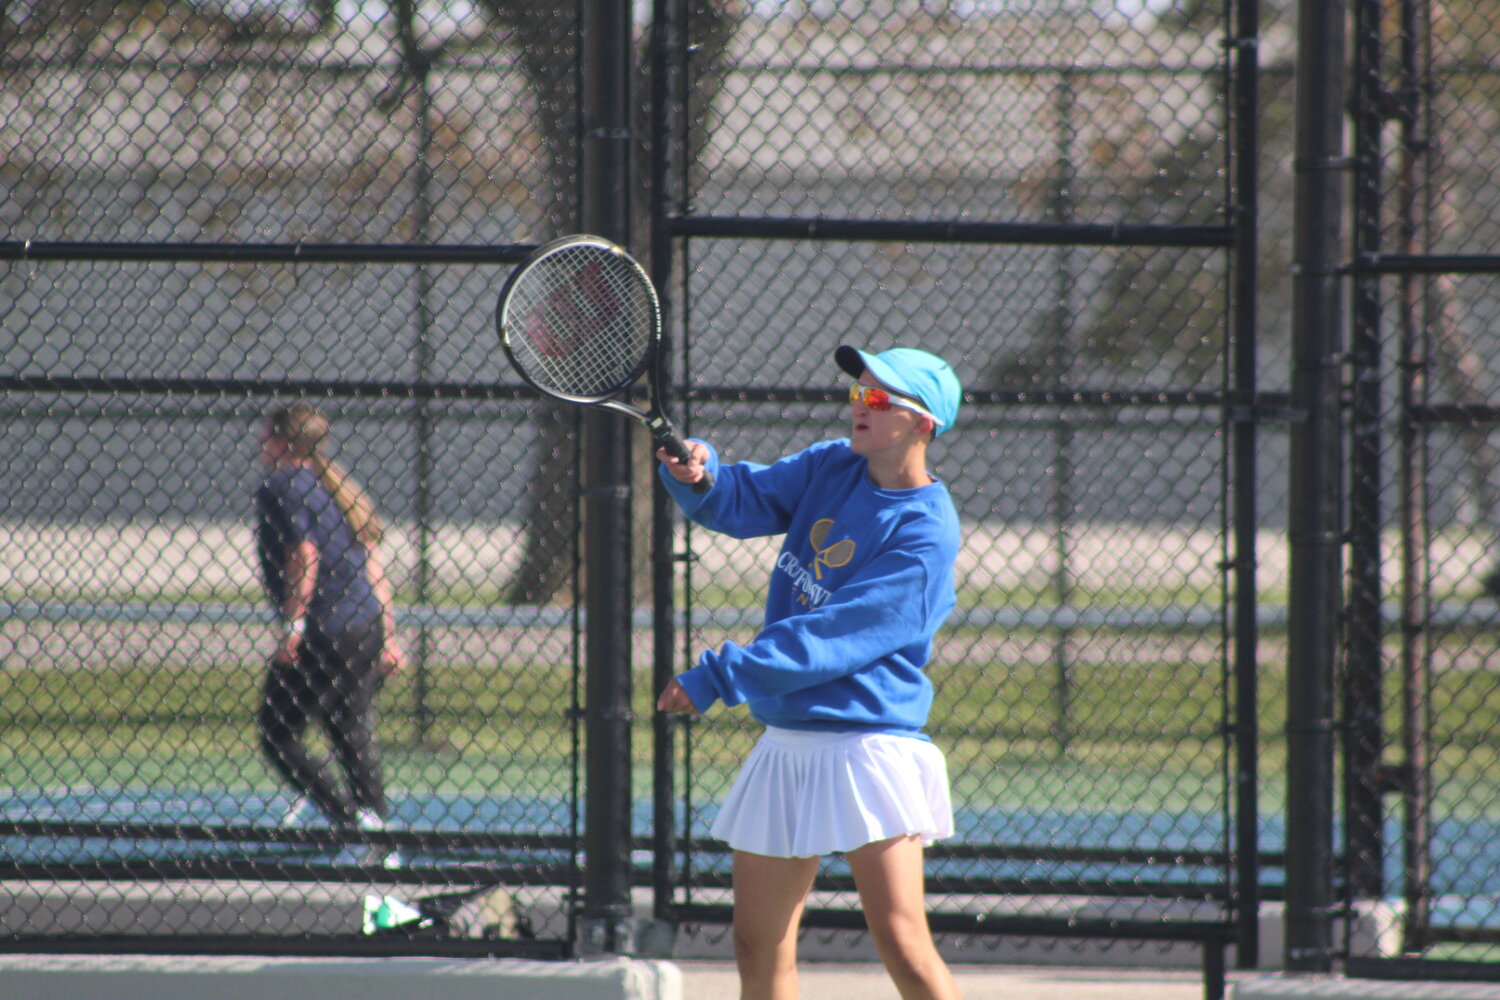 Reagan Cox continues to hold steady at the No. 2 singles spot for the Athenians.